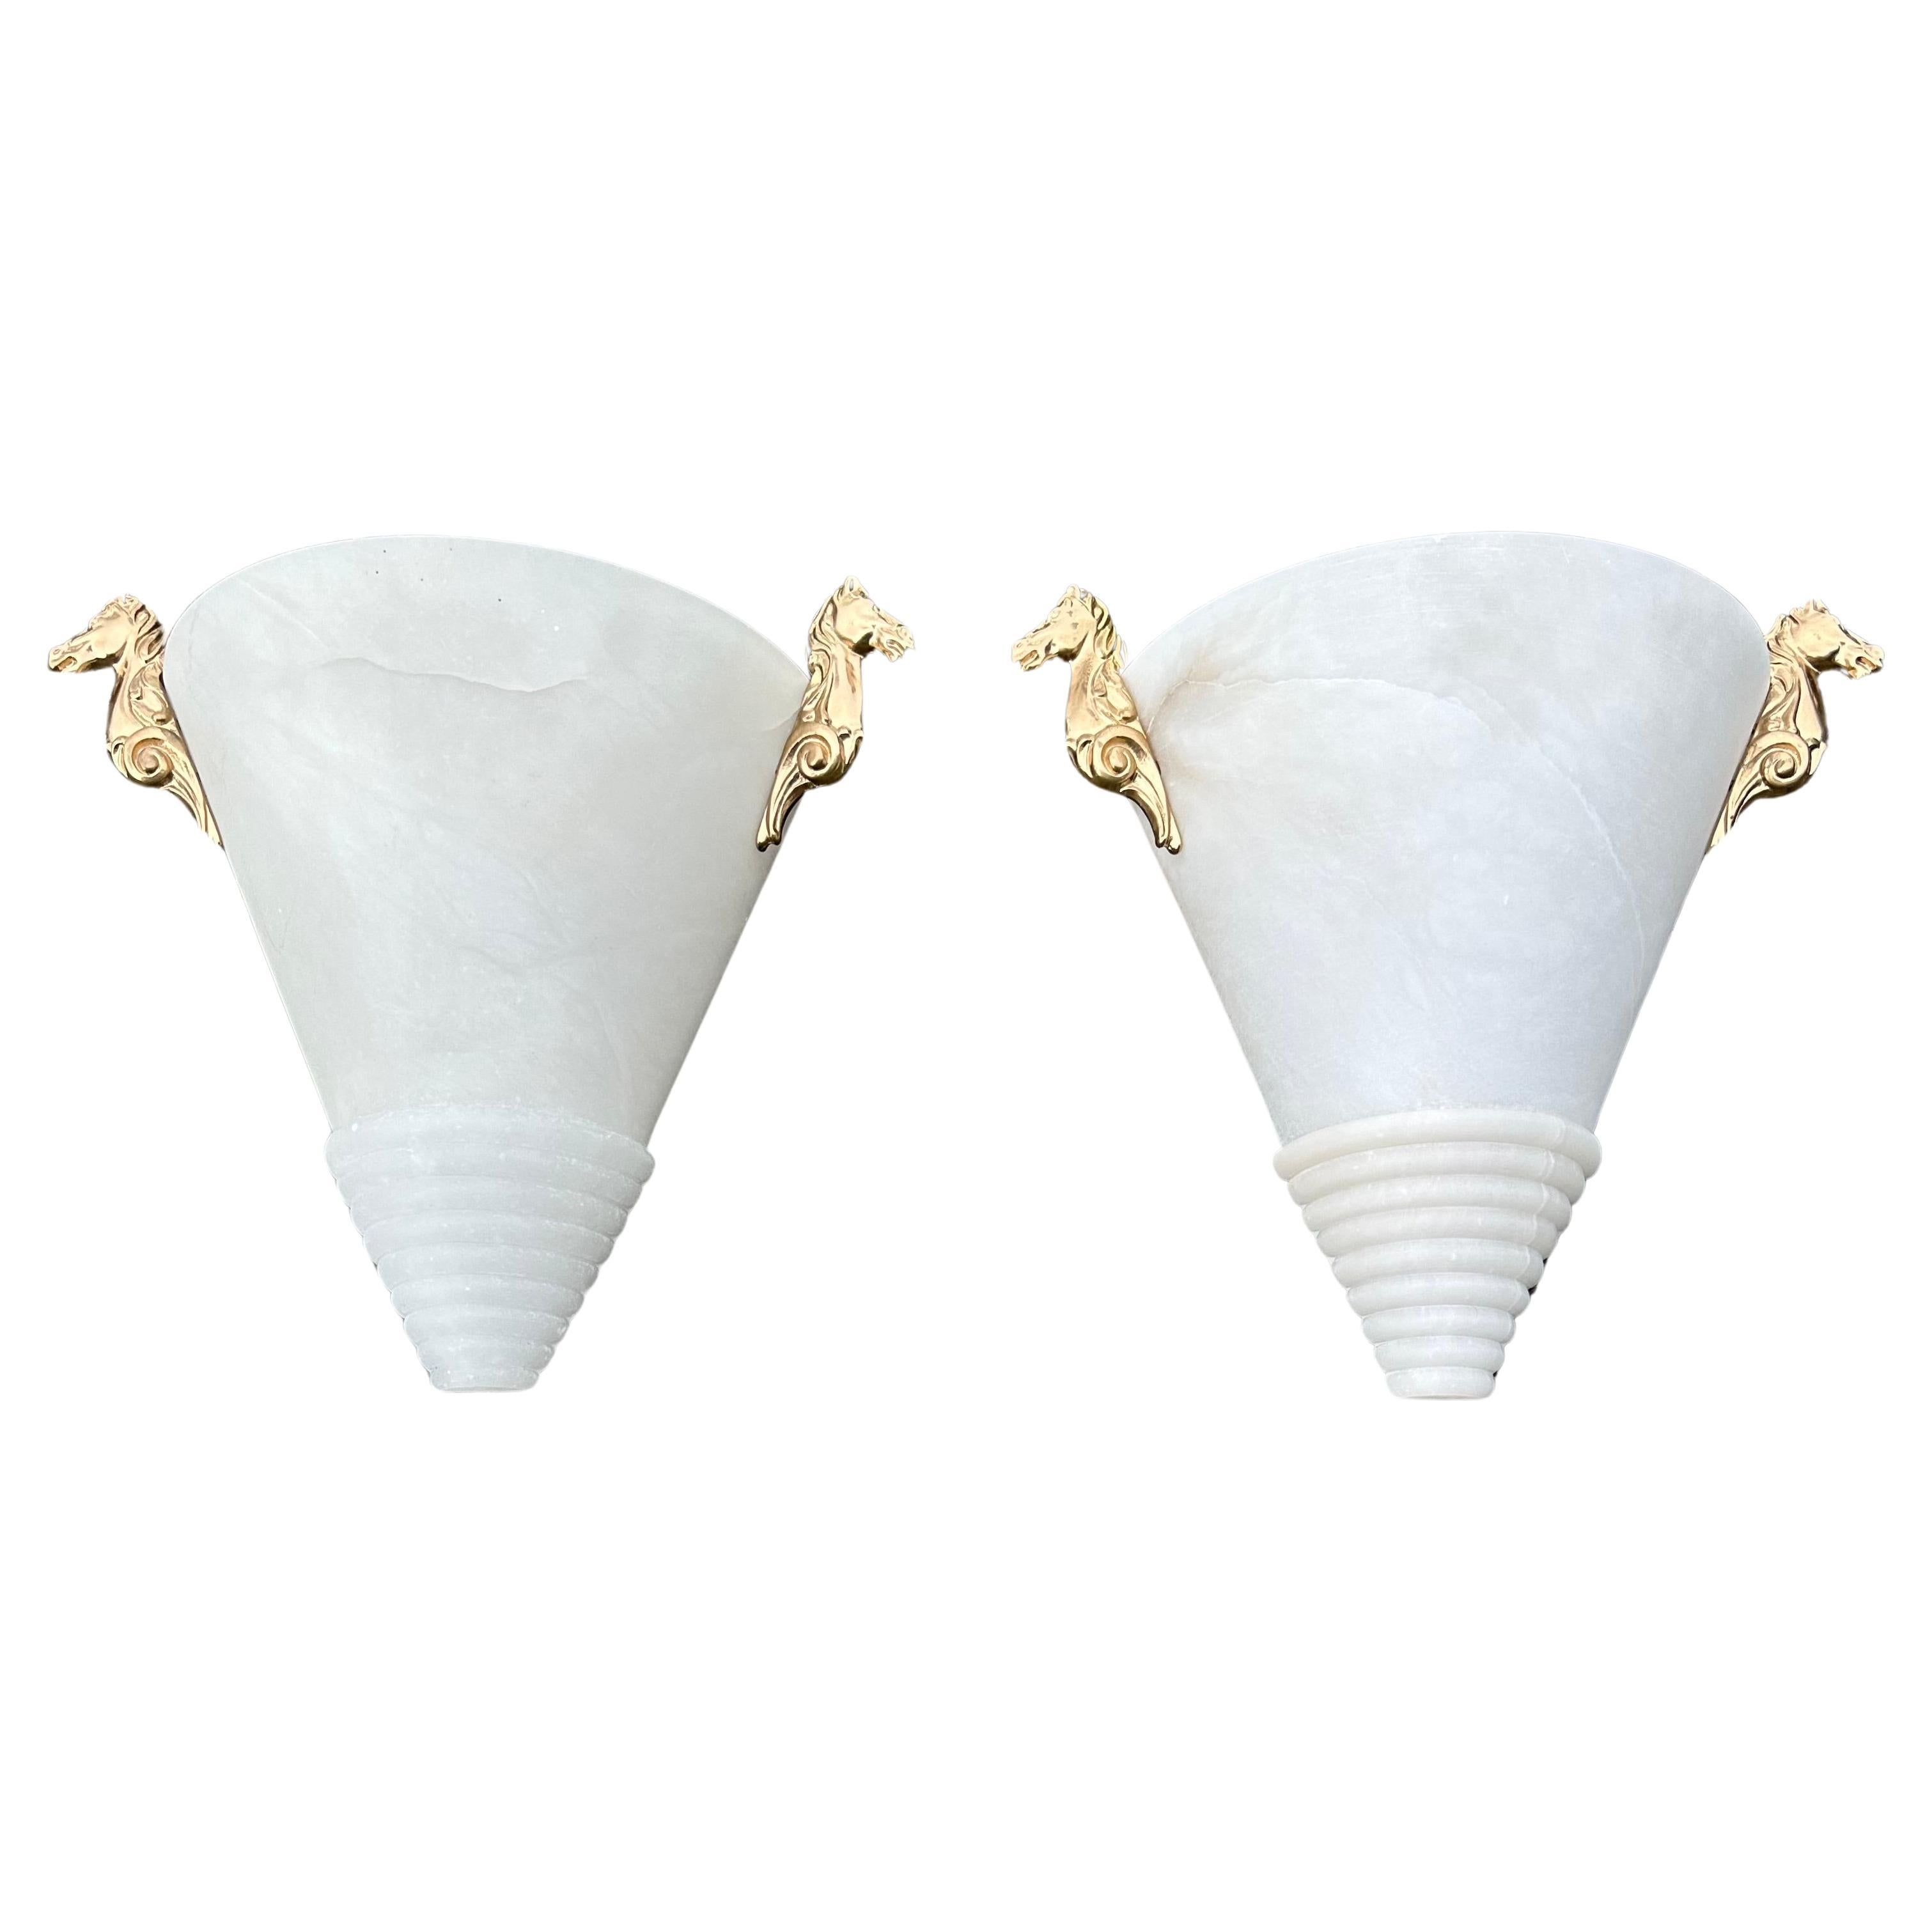 Midcentury Modern Italy Pair Art Deco Style Alabaster Sconces w Horse Sculptures For Sale